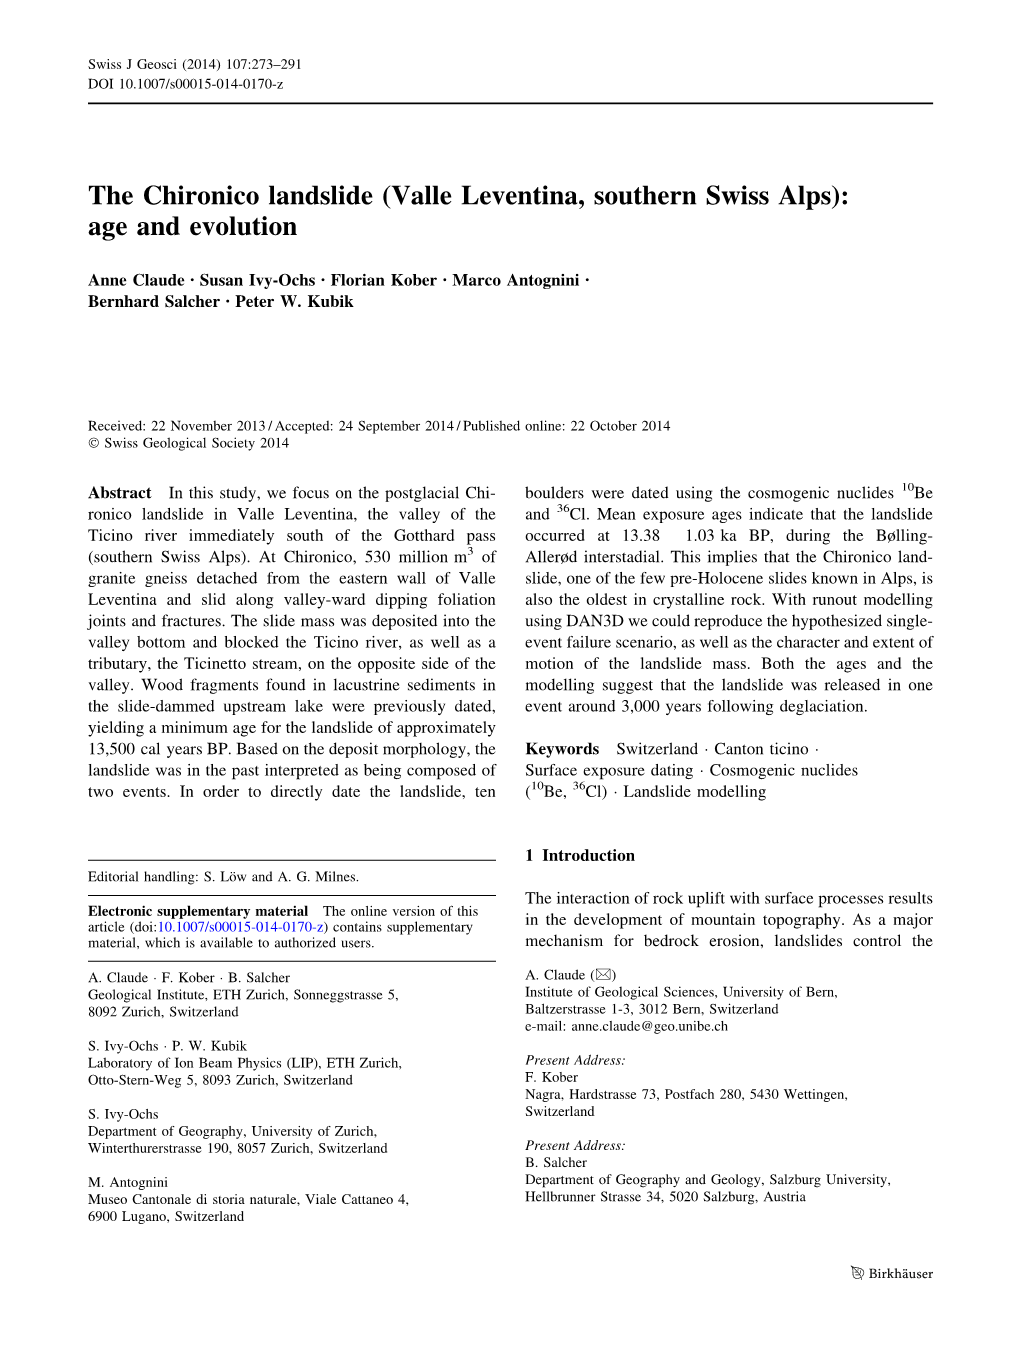 The Chironico Landslide (Valle Leventina, Southern Swiss Alps): Age and Evolution